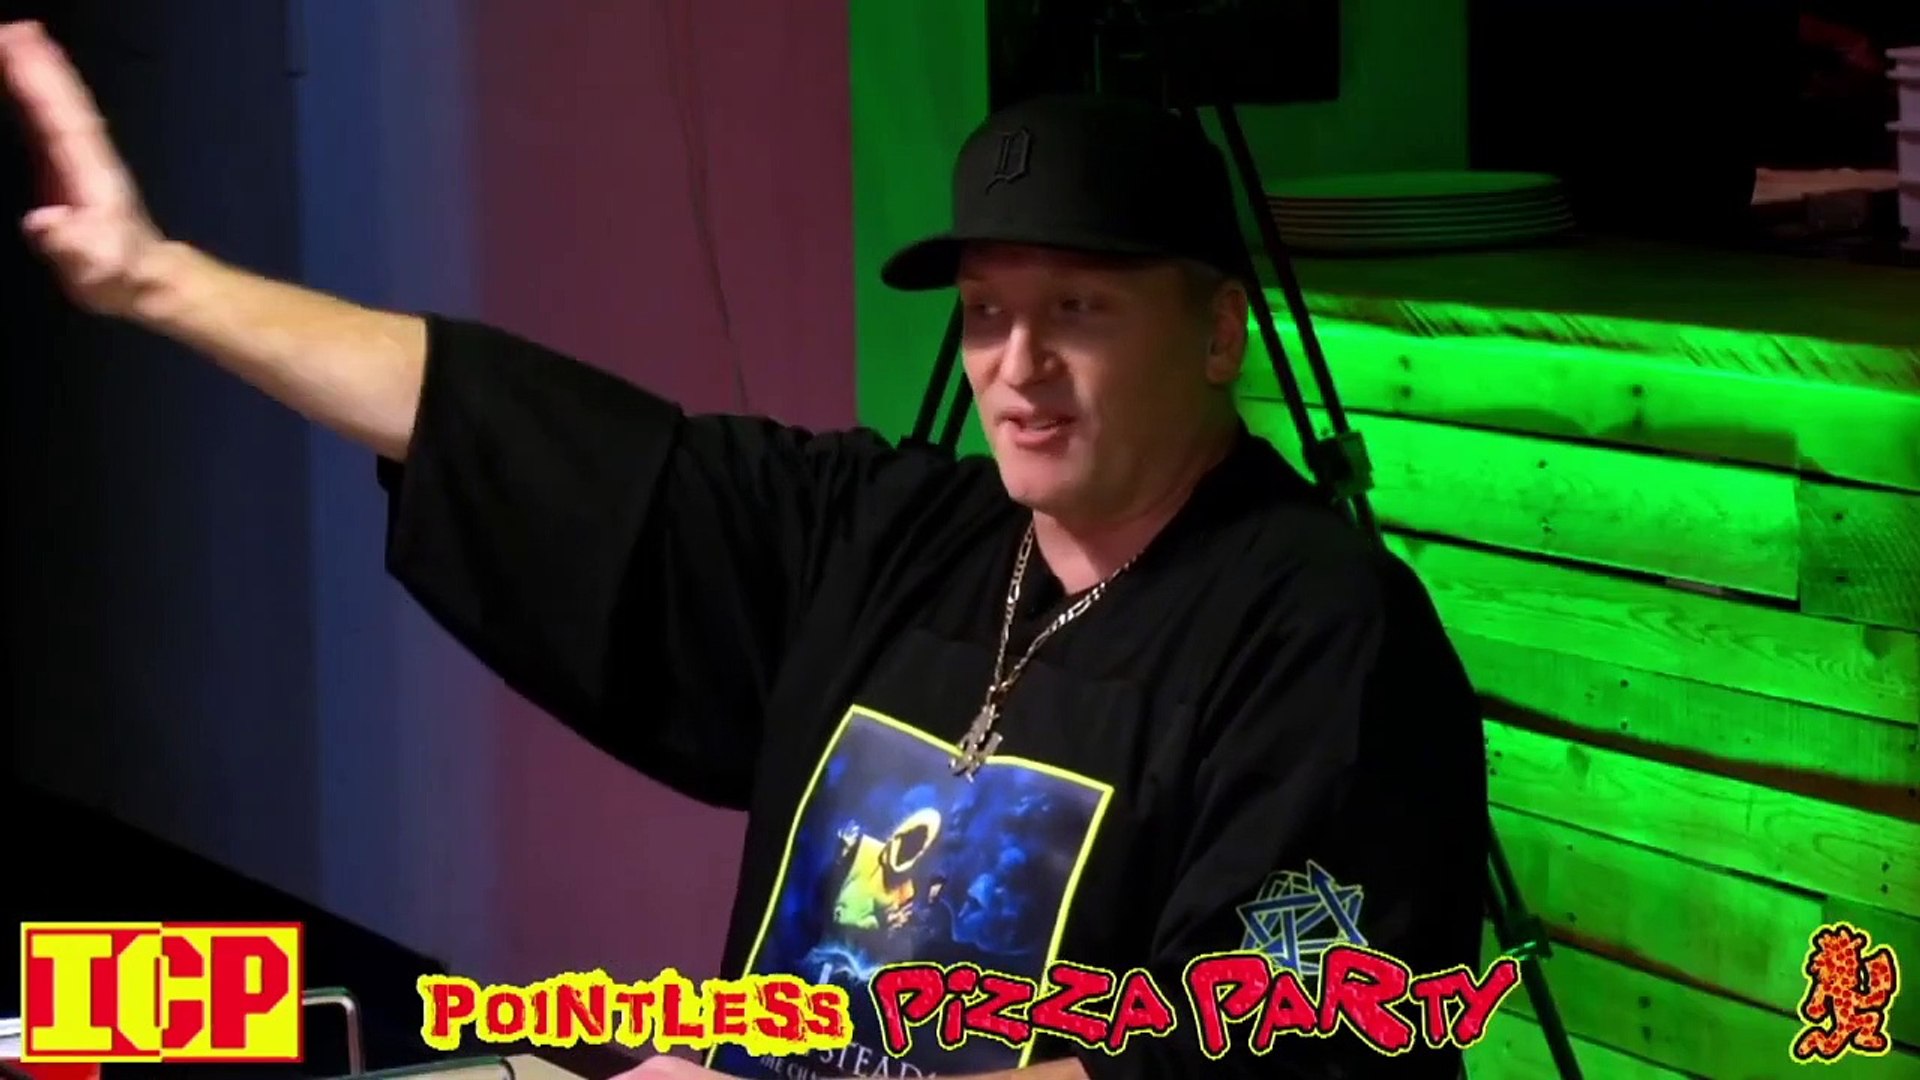 ICP Pointless Pizza Party 12-30-2020 [Part 1]